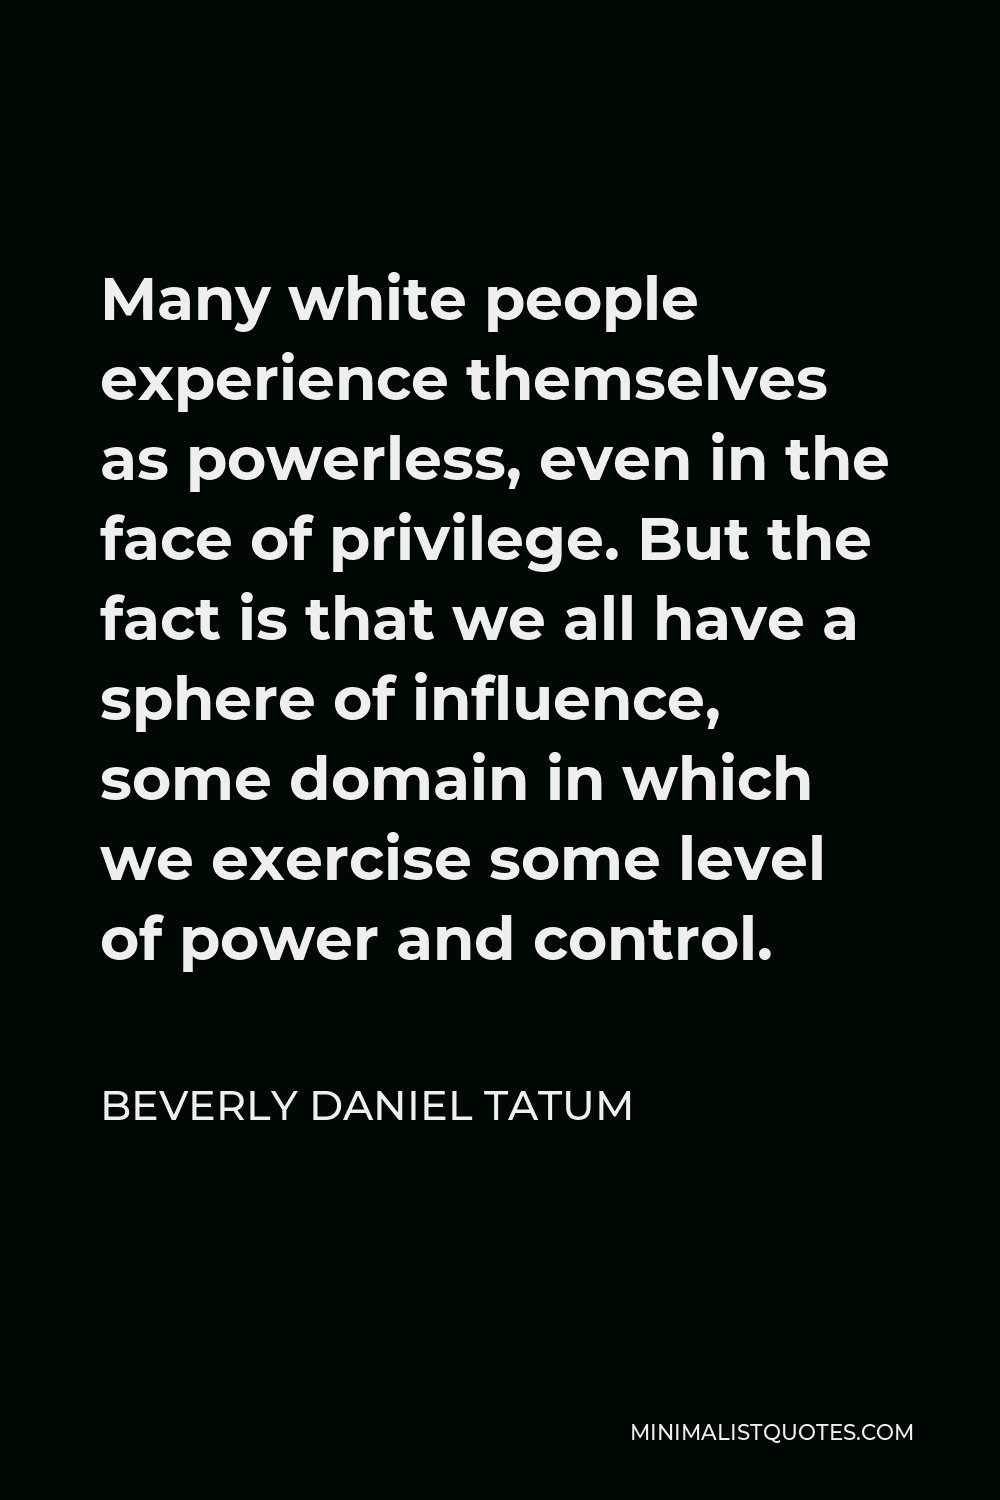 Beverly Daniel Tatum Quote - Many white people experience themselves as powerless, even in the face of privilege. But the fact is that we all have a sphere of influence, some domain in which we exercise some level of power and control.